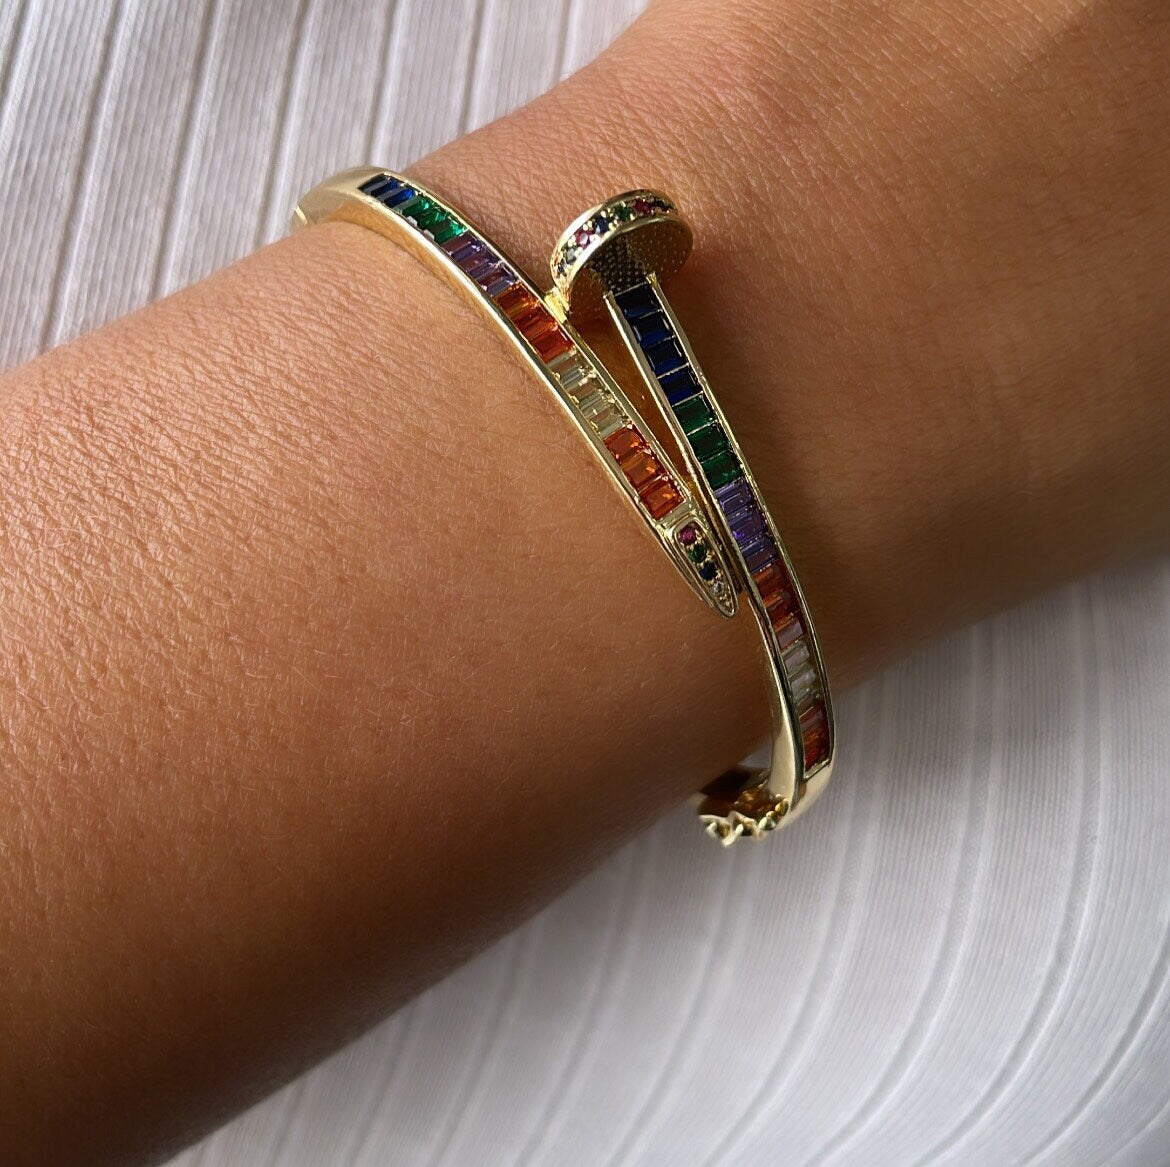 18k GoldFilled Nail Structure Cuff Bracelet with Colorful Baguette Stones